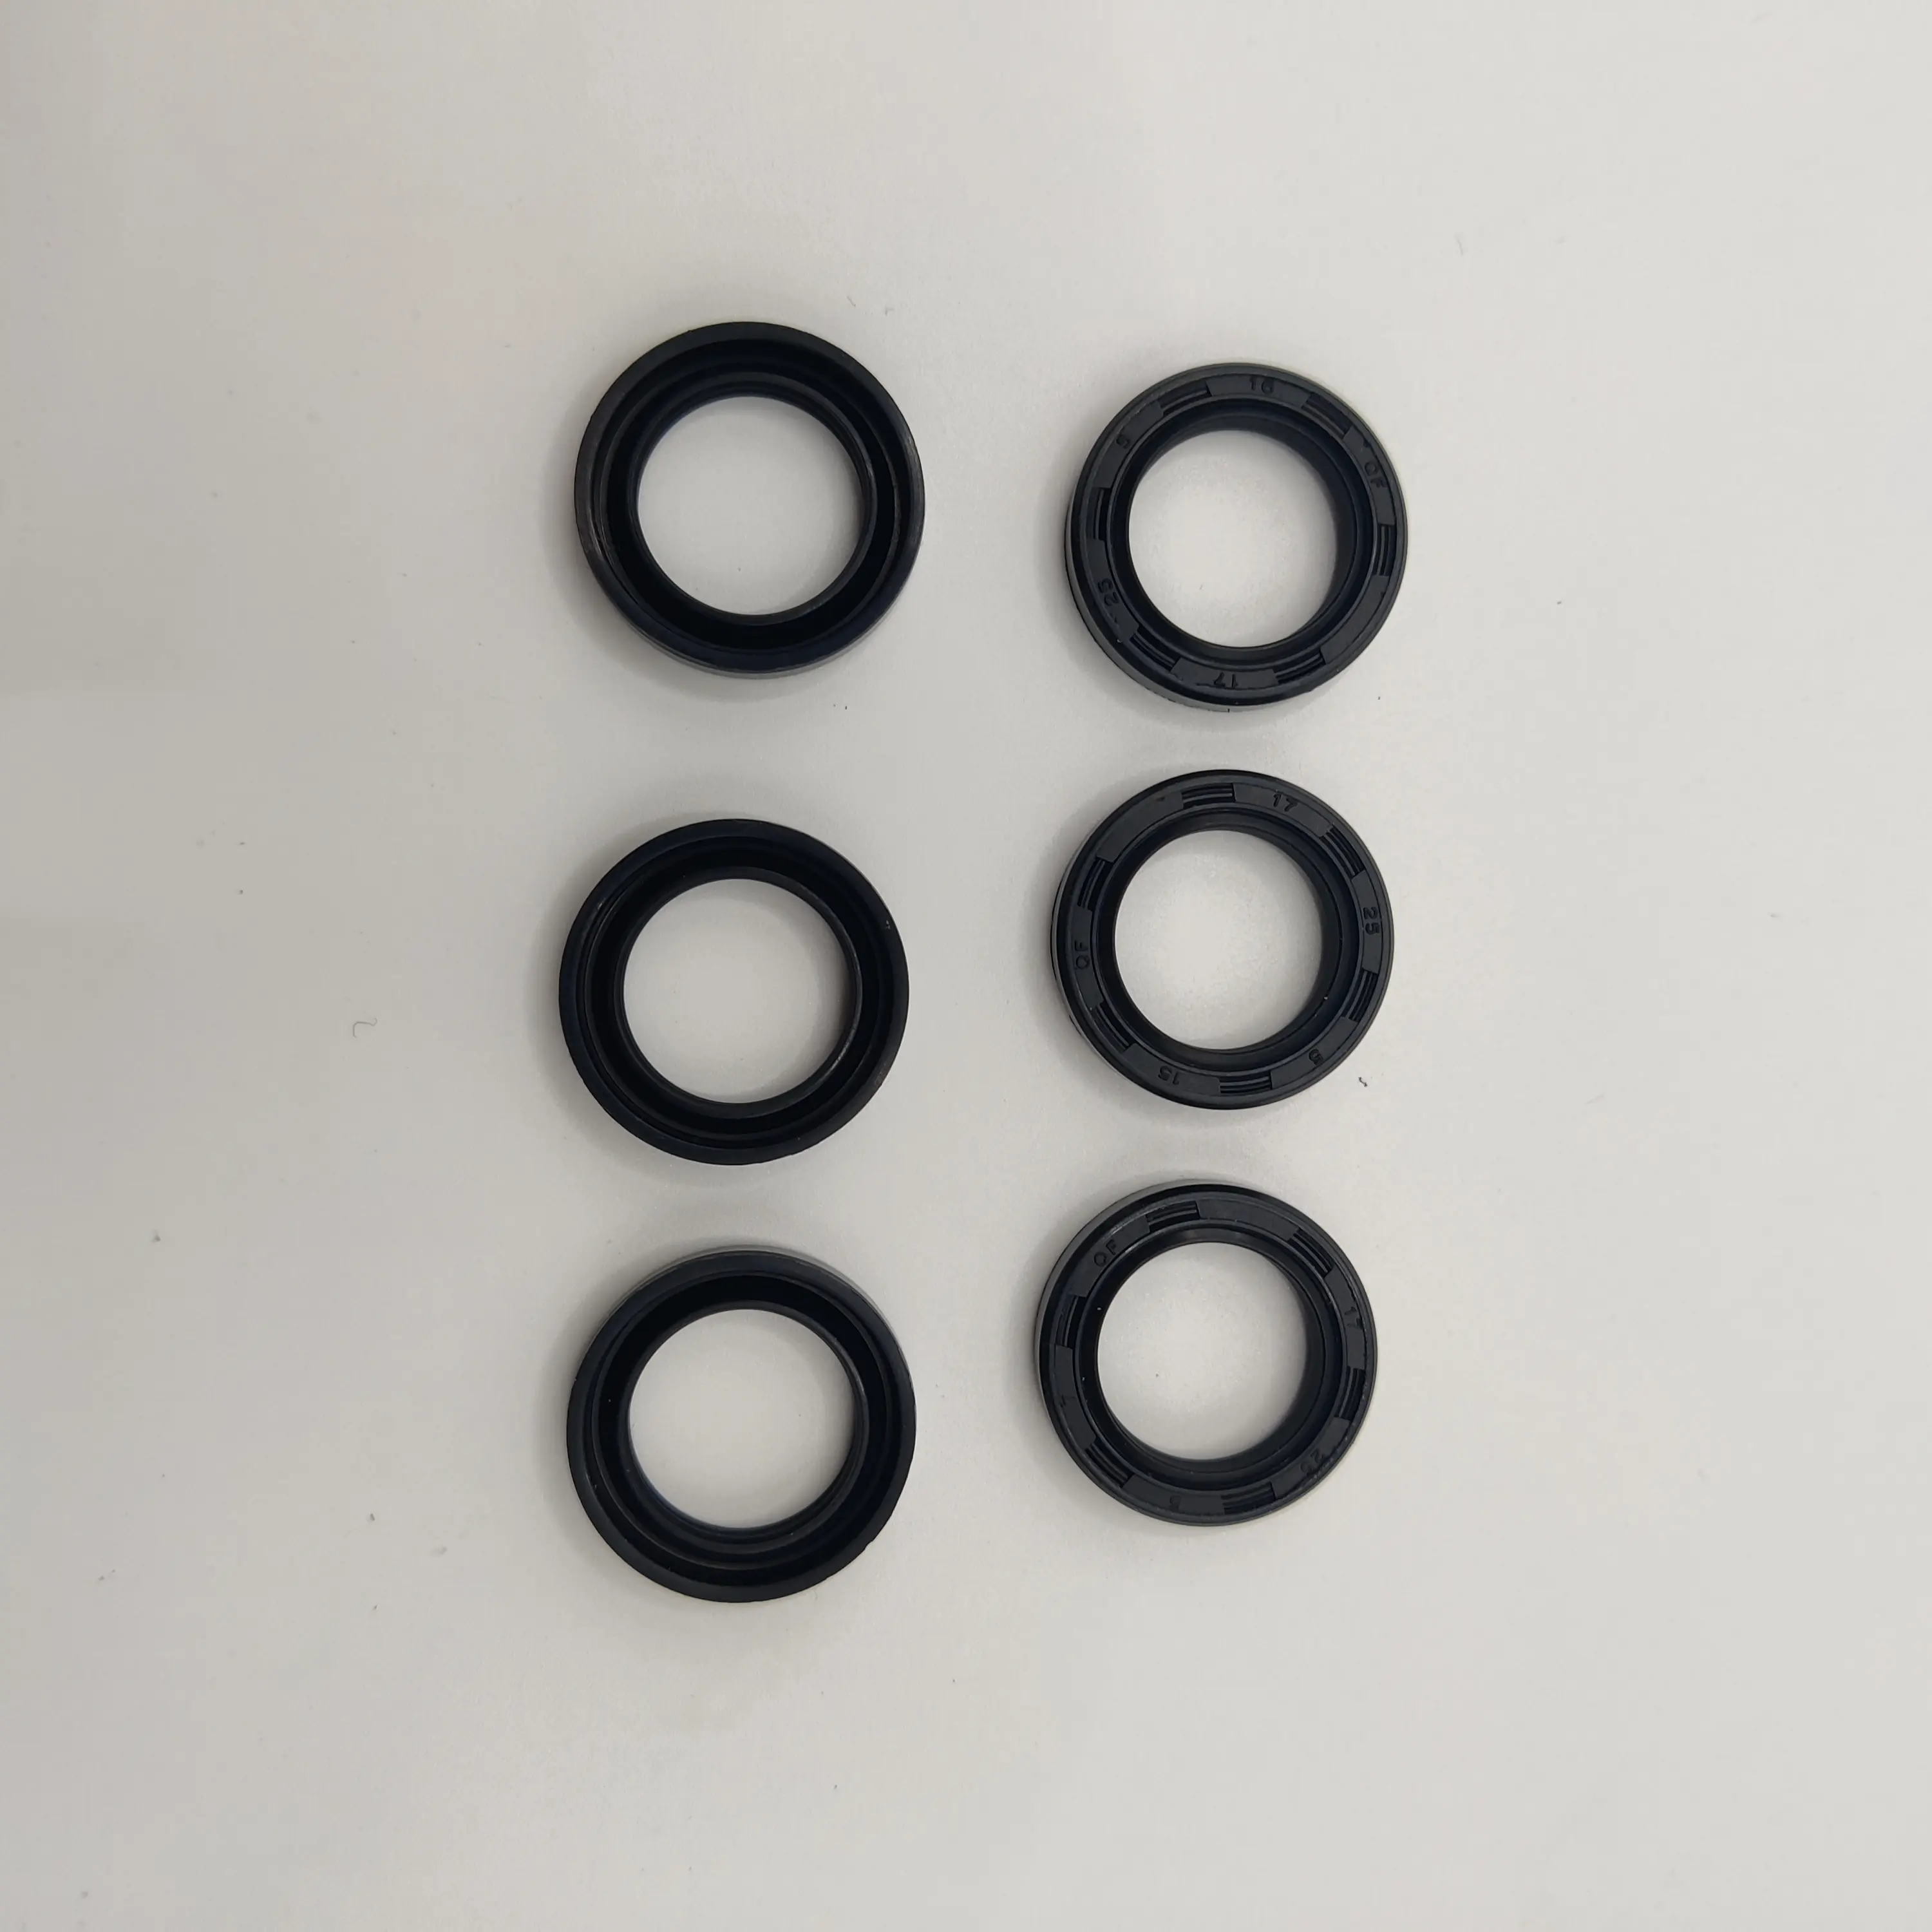 Zhengyou Rubber Factory Products High Quality Standard Various Color HBR TC Oil Seal 17*25*5